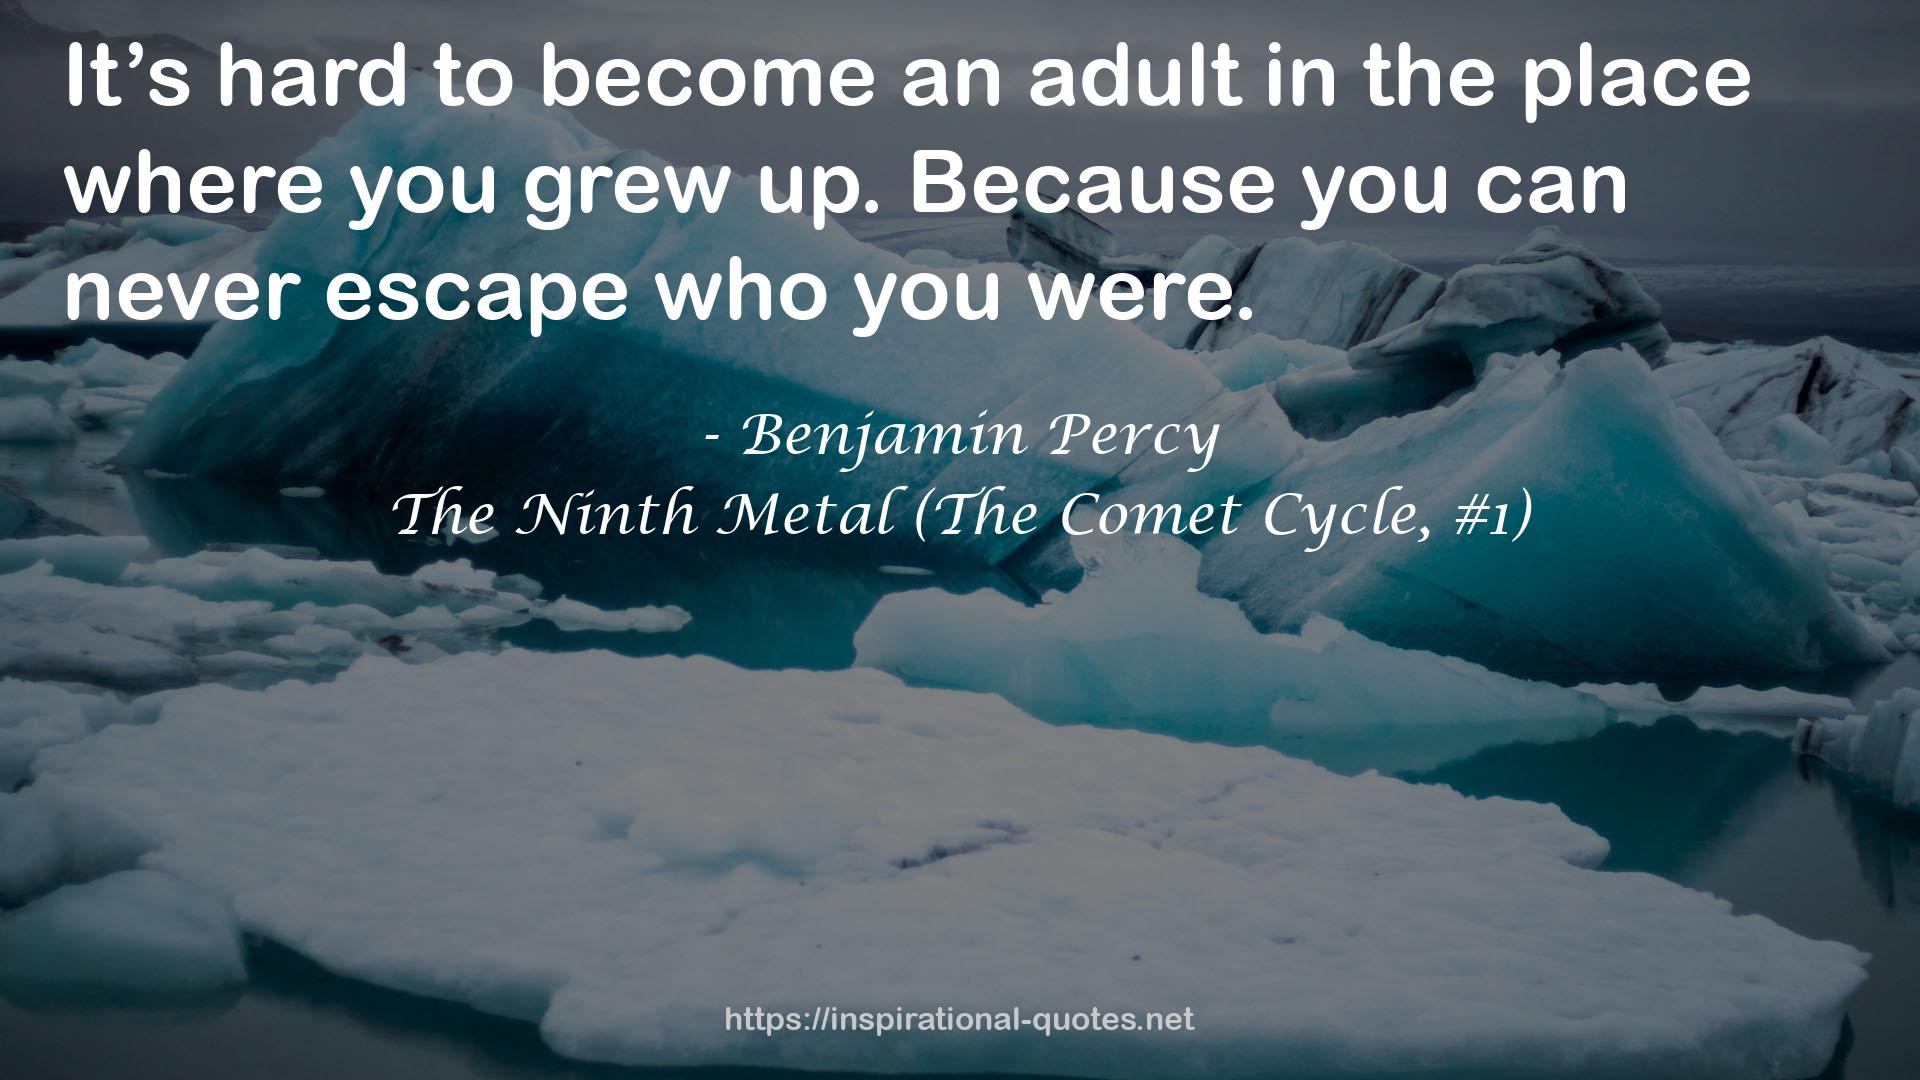 The Ninth Metal (The Comet Cycle, #1) QUOTES